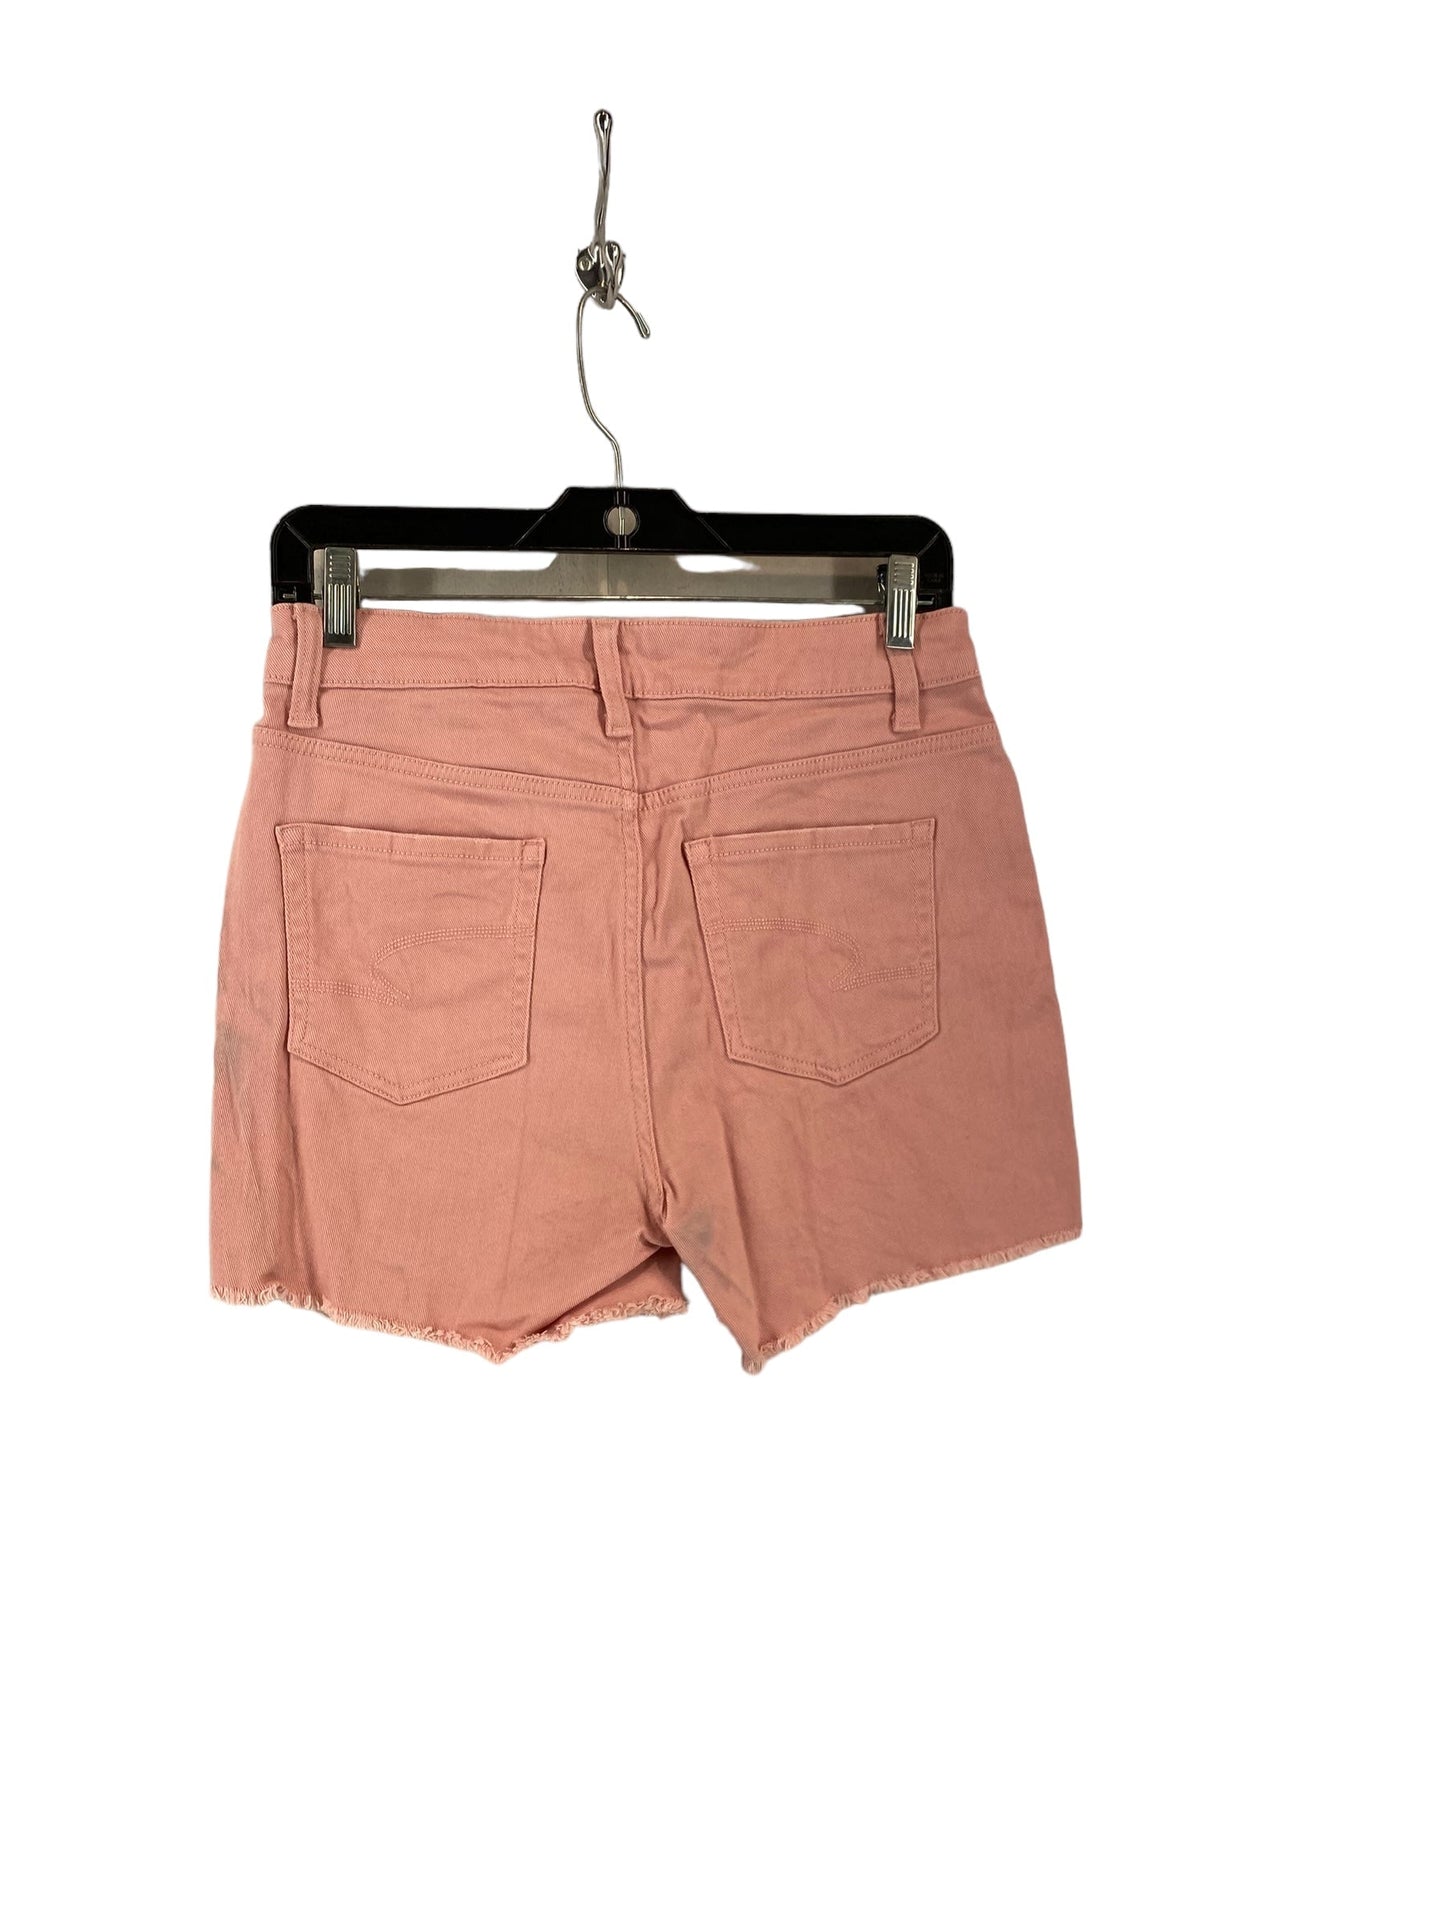 Pink Denim Shorts Time And Tru, Size 6